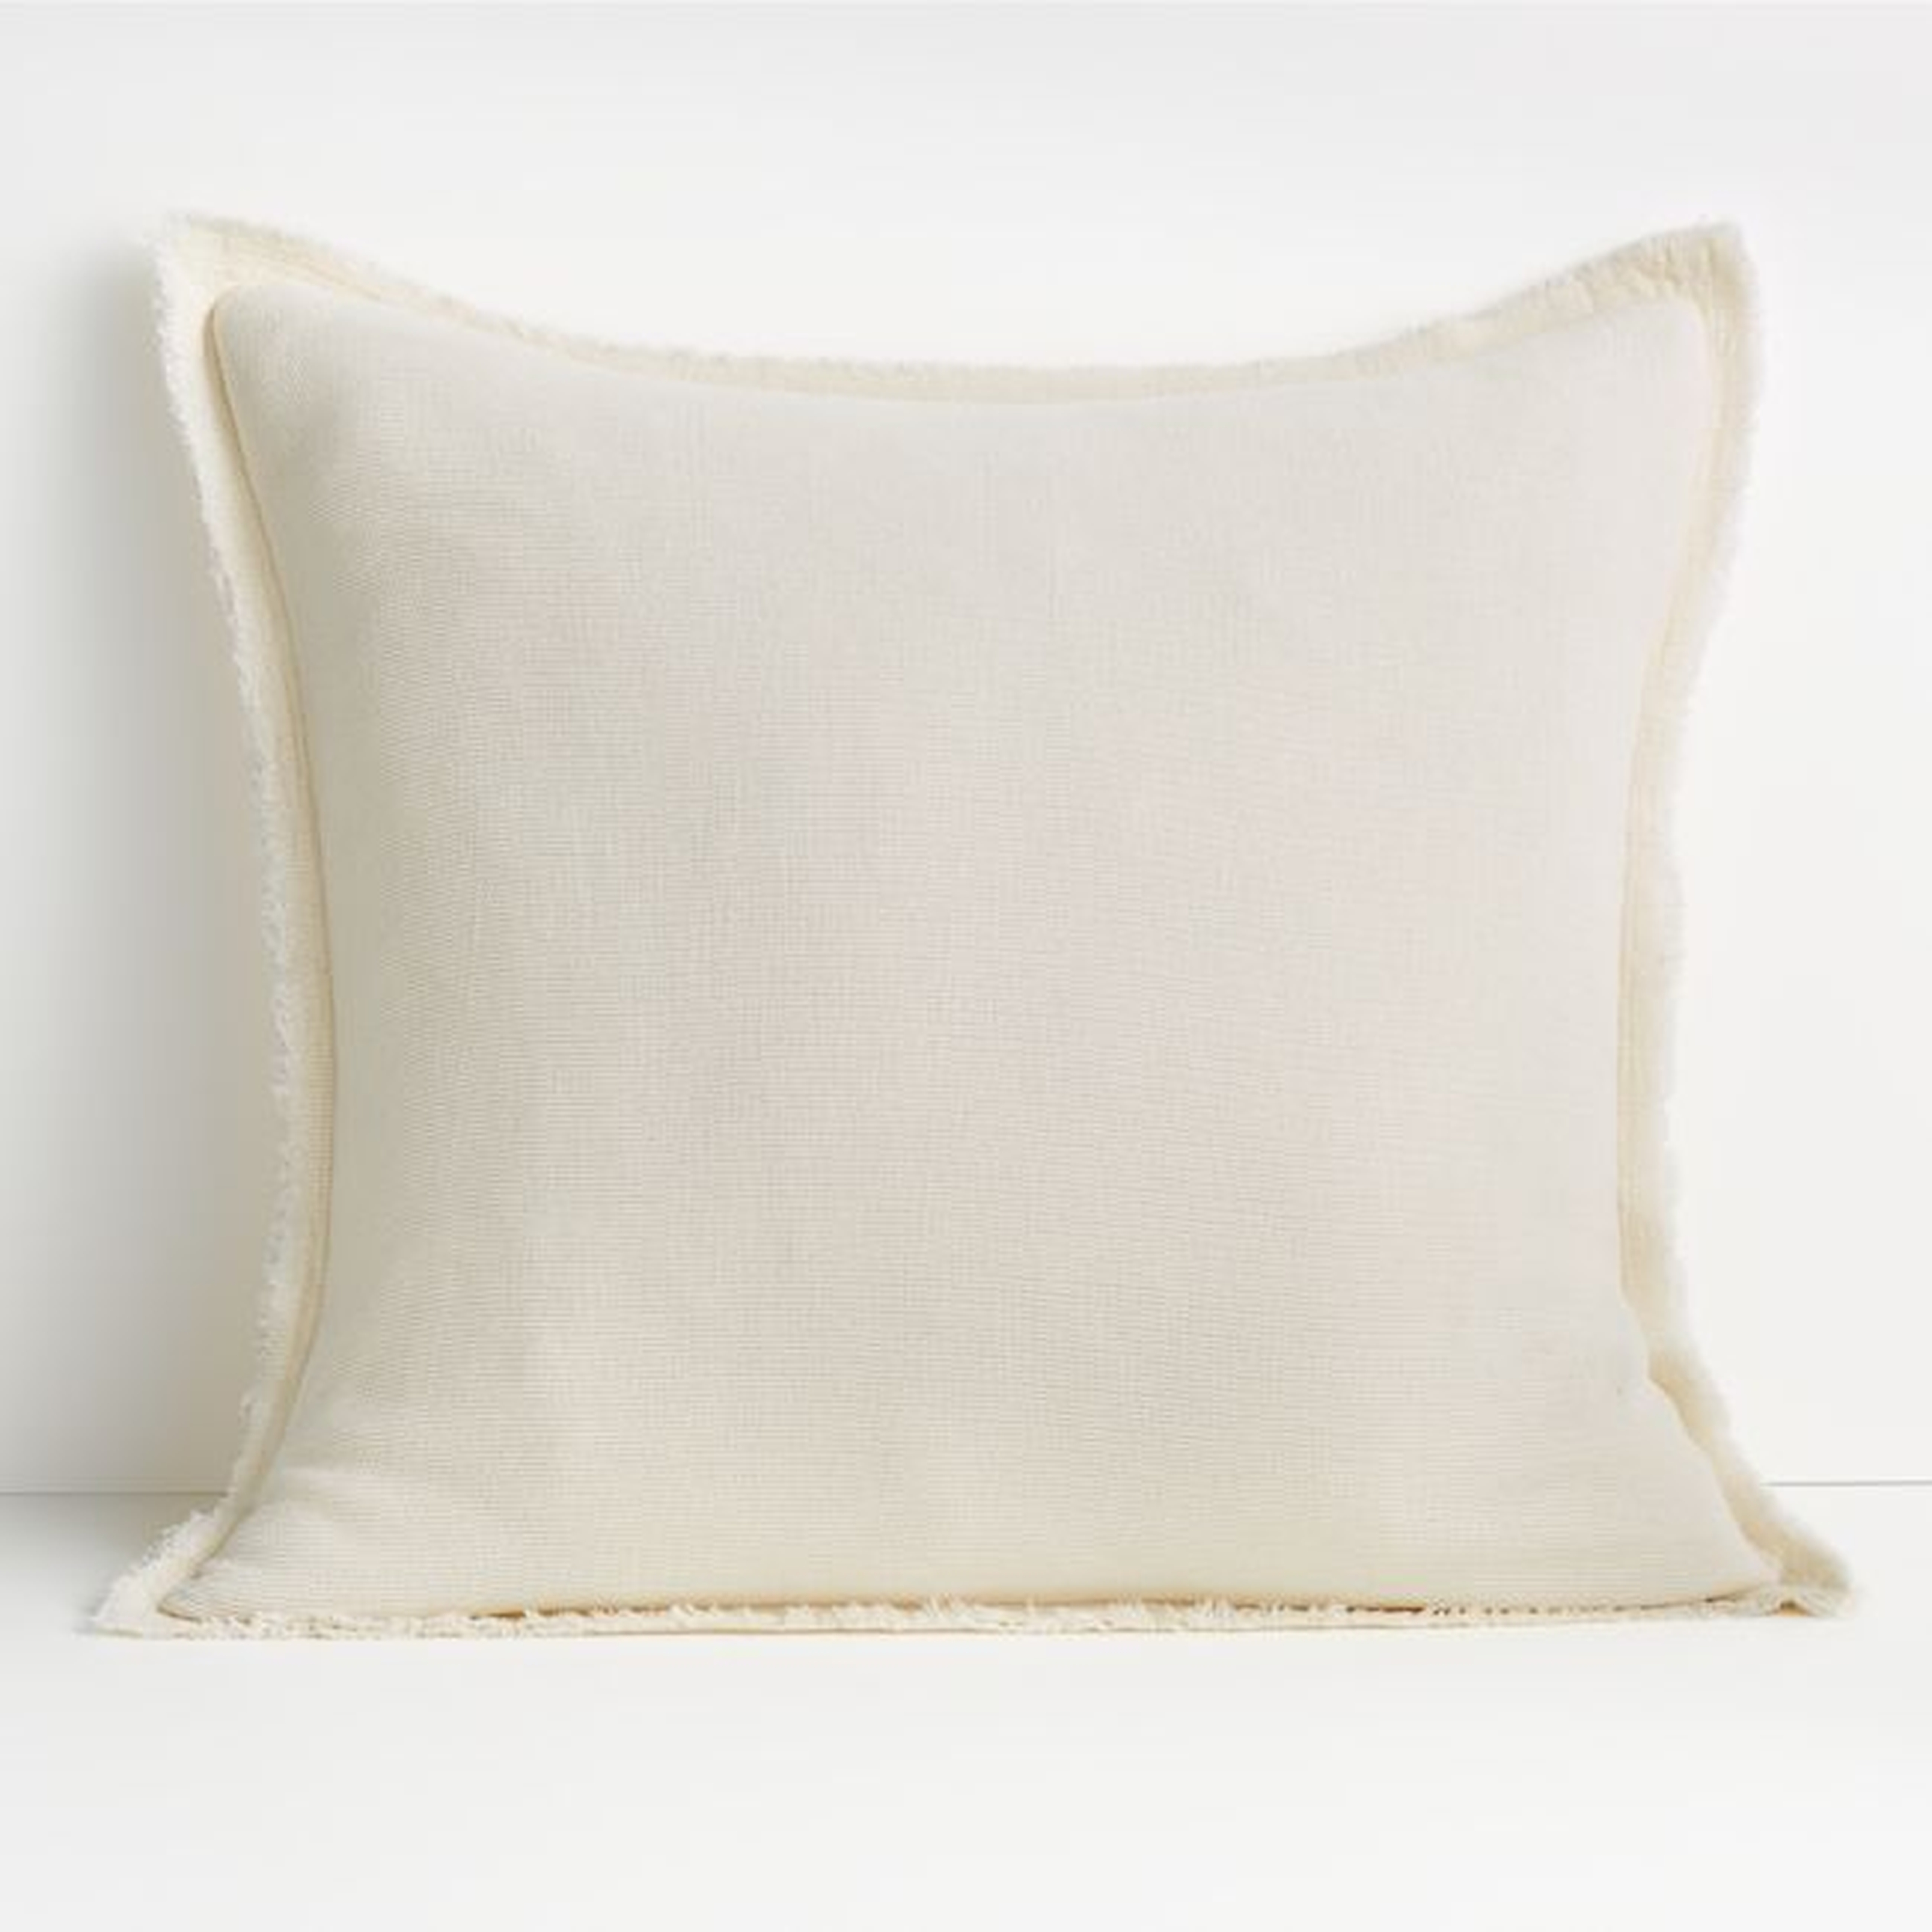 Olind 23"x23" Cream Throw Pillow Cover - Crate and Barrel